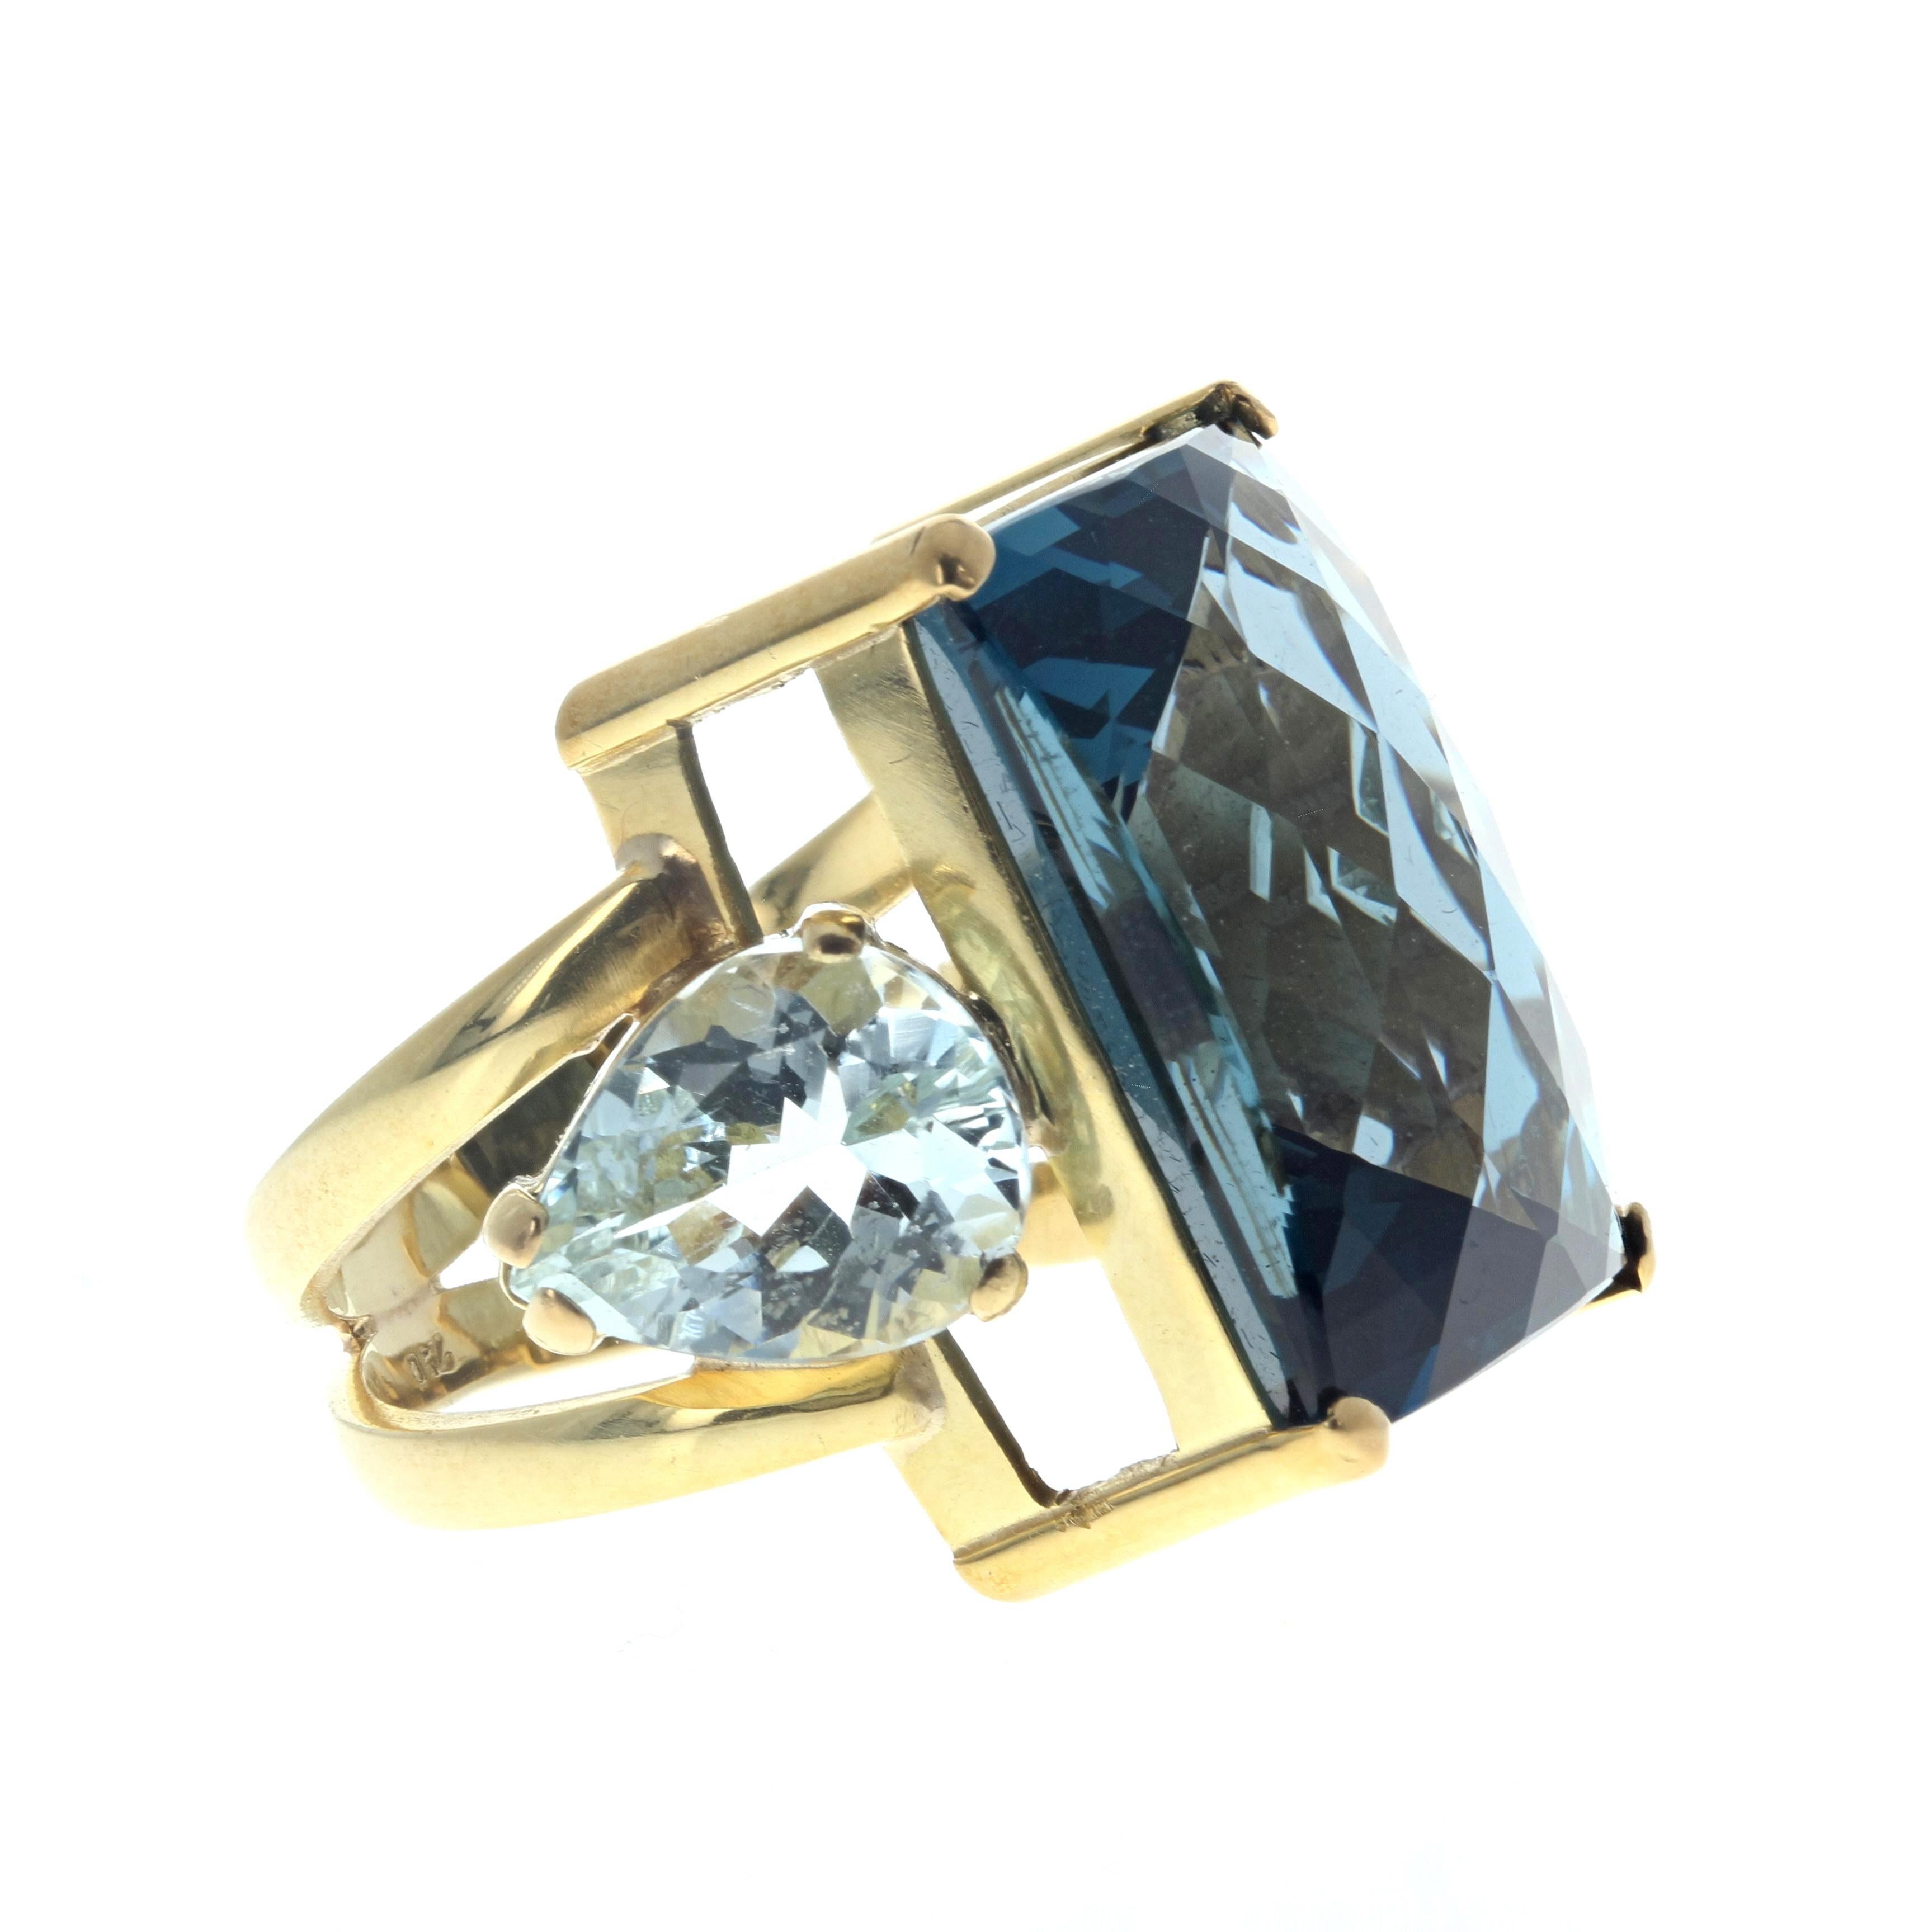 This beautiful real London Blue Topaz is 23 carats and measures approximately  20mm x 15mm.  The beautiful real blue pear shaped Aquamarines are approximately 5 carats each and are approximately 10mm x 18mm.  They are set in a 14KT yellow gold ring